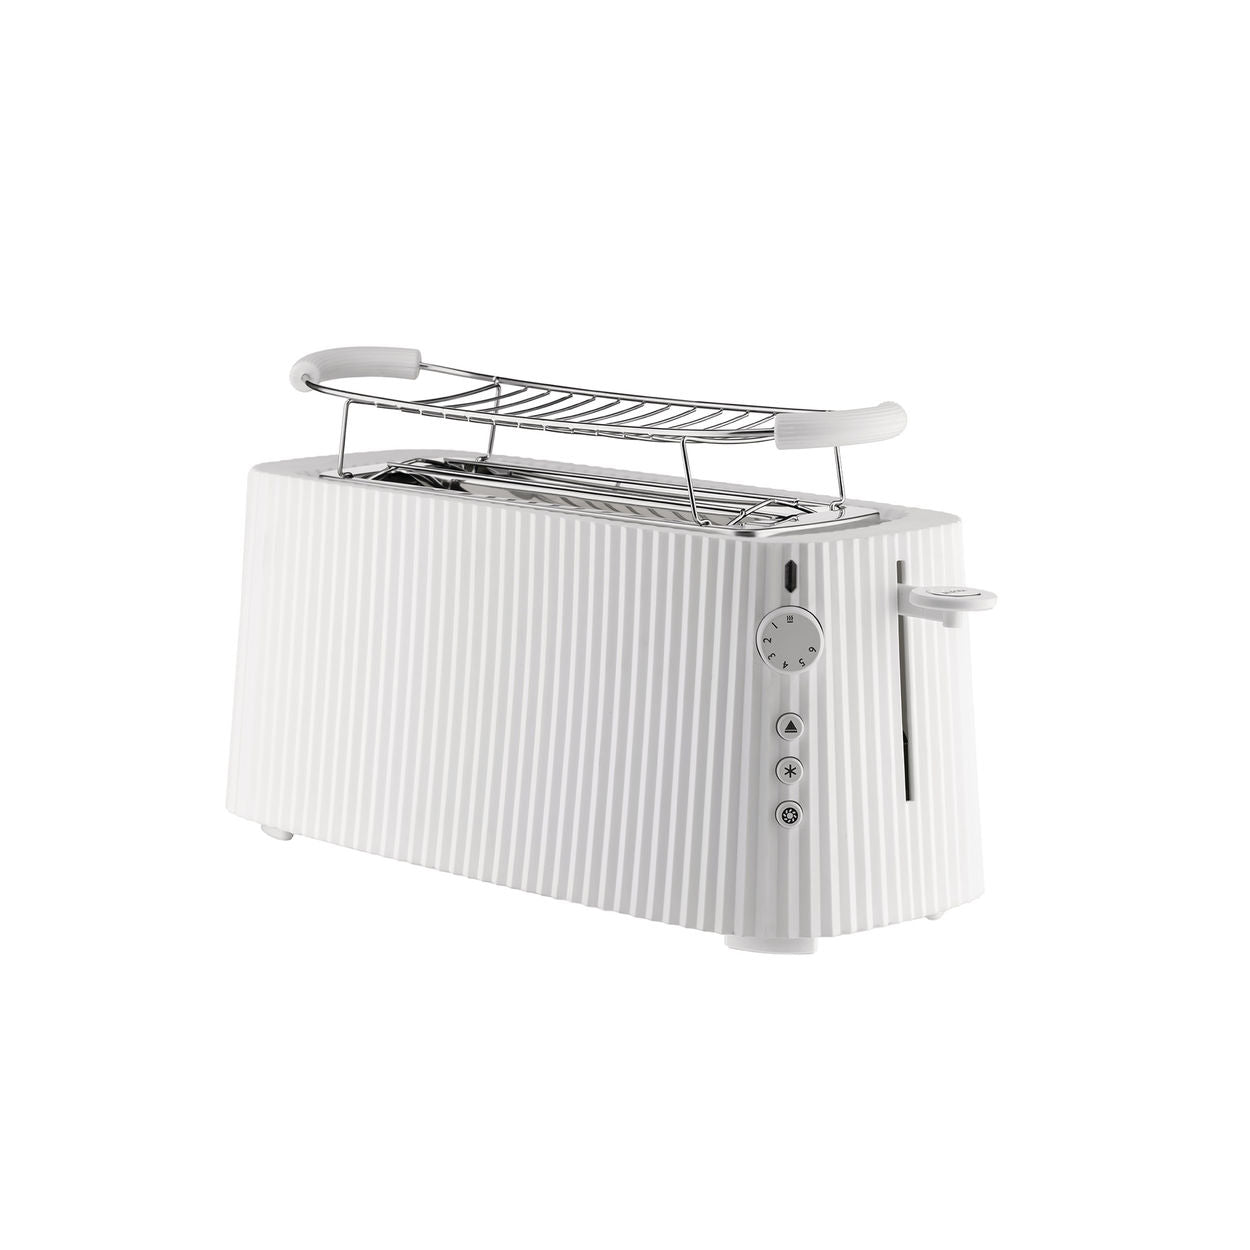 Alessi Prissé Long Double Toaster, bianco